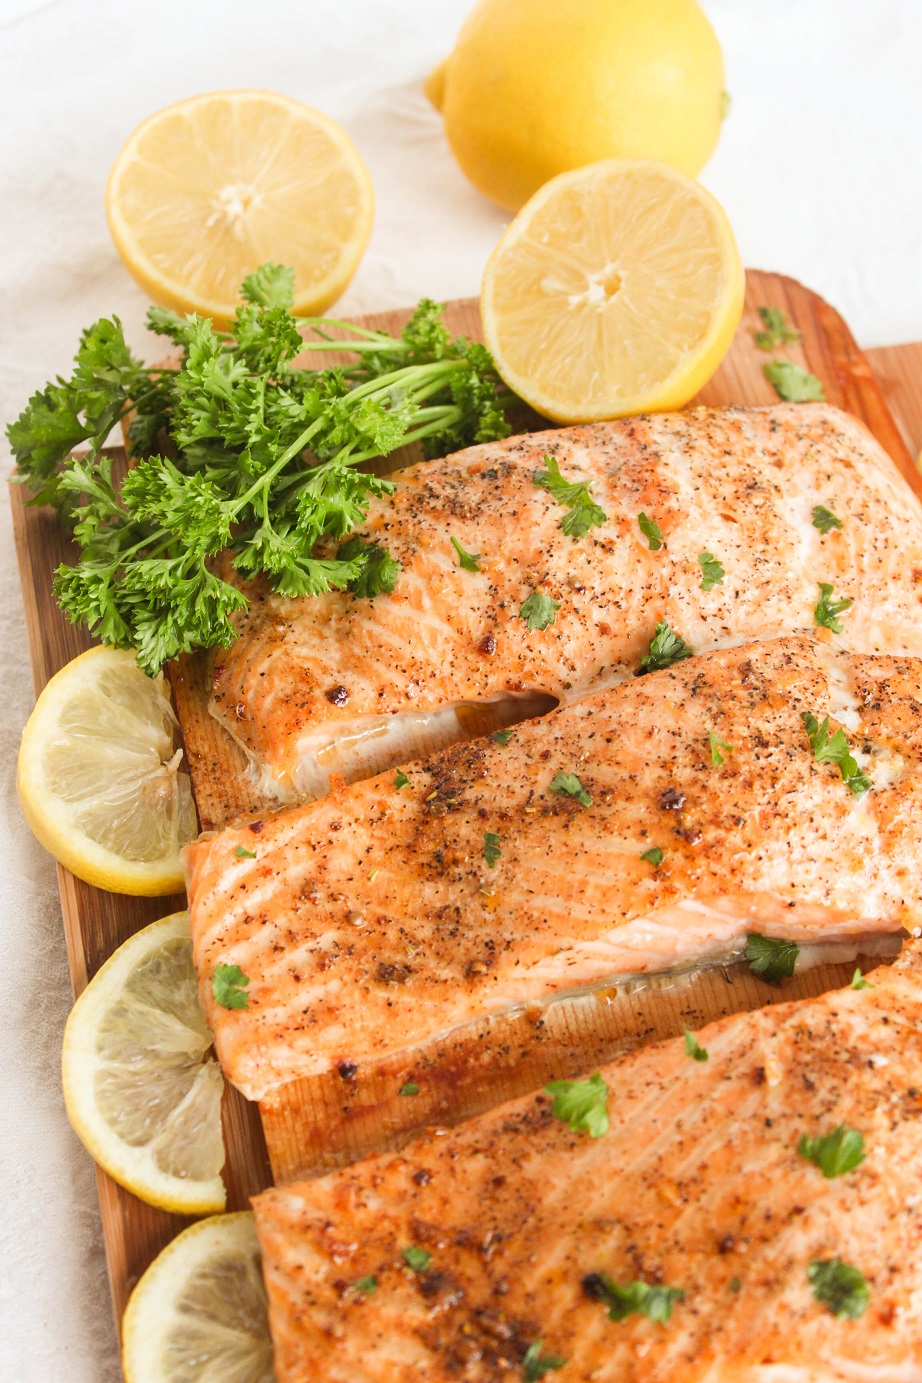 Baked Salmon with Herbs and Lemon - Delicious, flavorful and very easy to prepare.